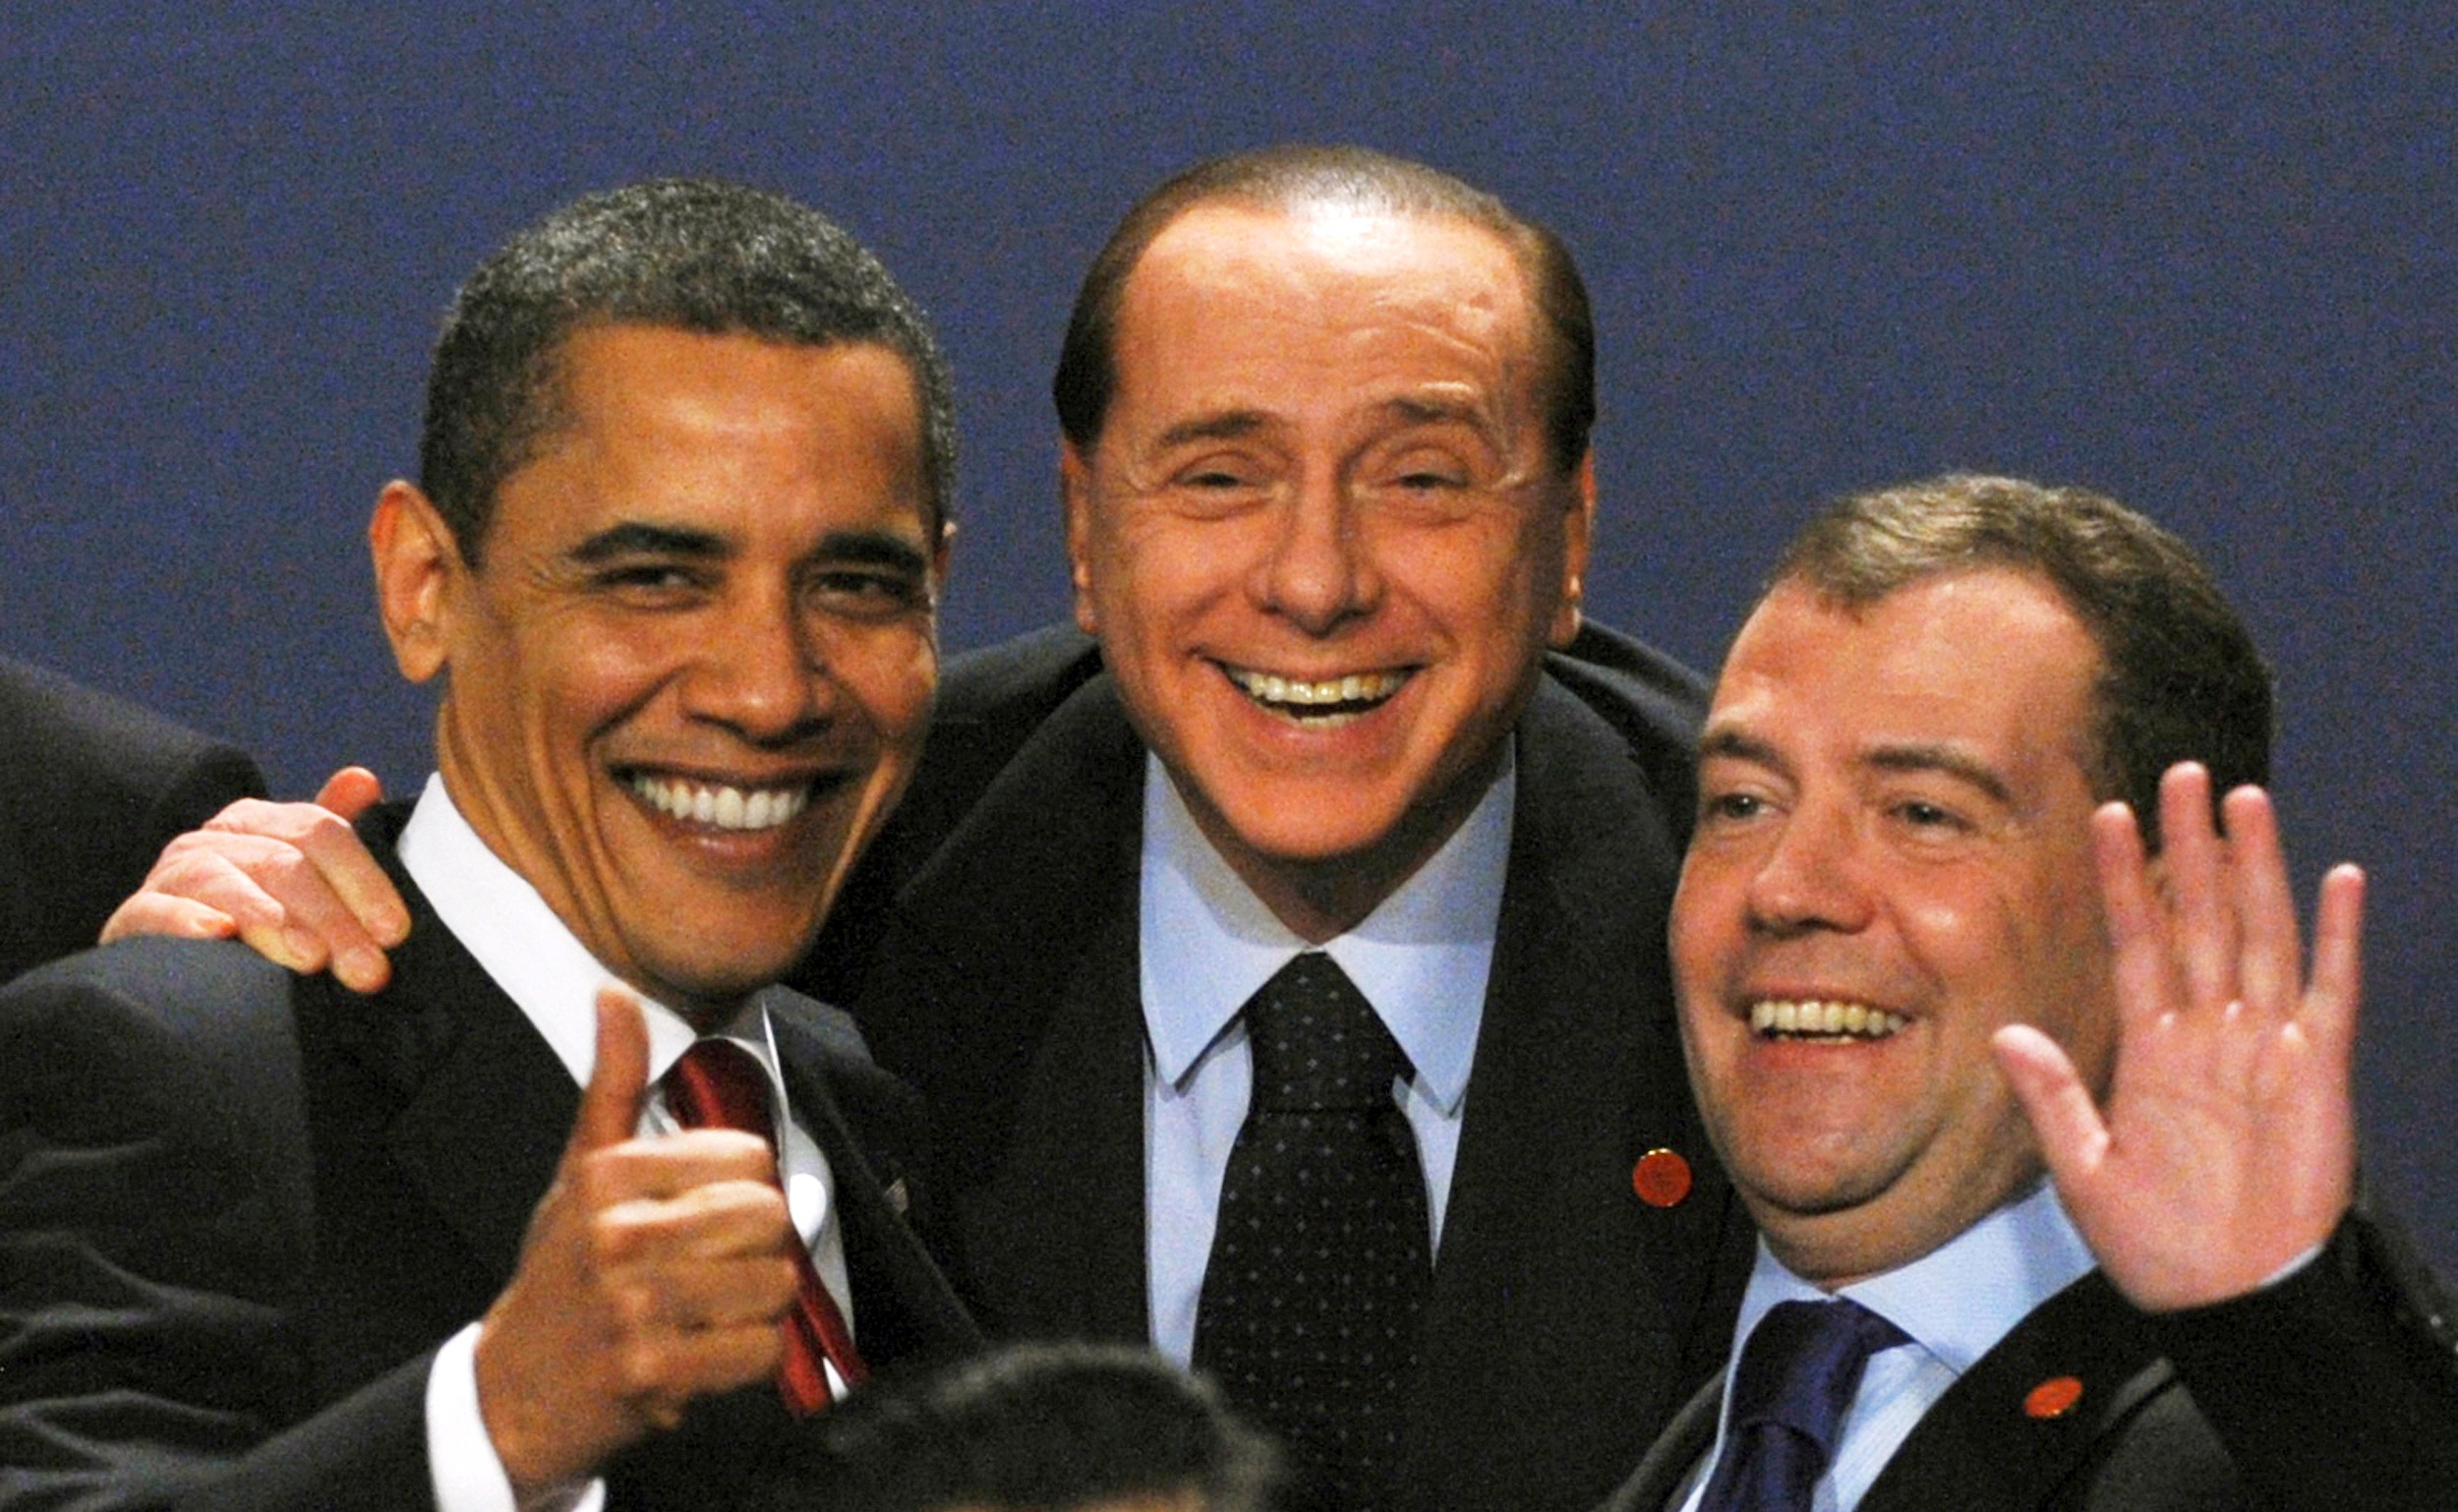 Berlusconi laughs with former U.S President Barack Obama and Russia's then President Dmitry Medvedev at a G20 summit in 2009./Reuters/Stringer.